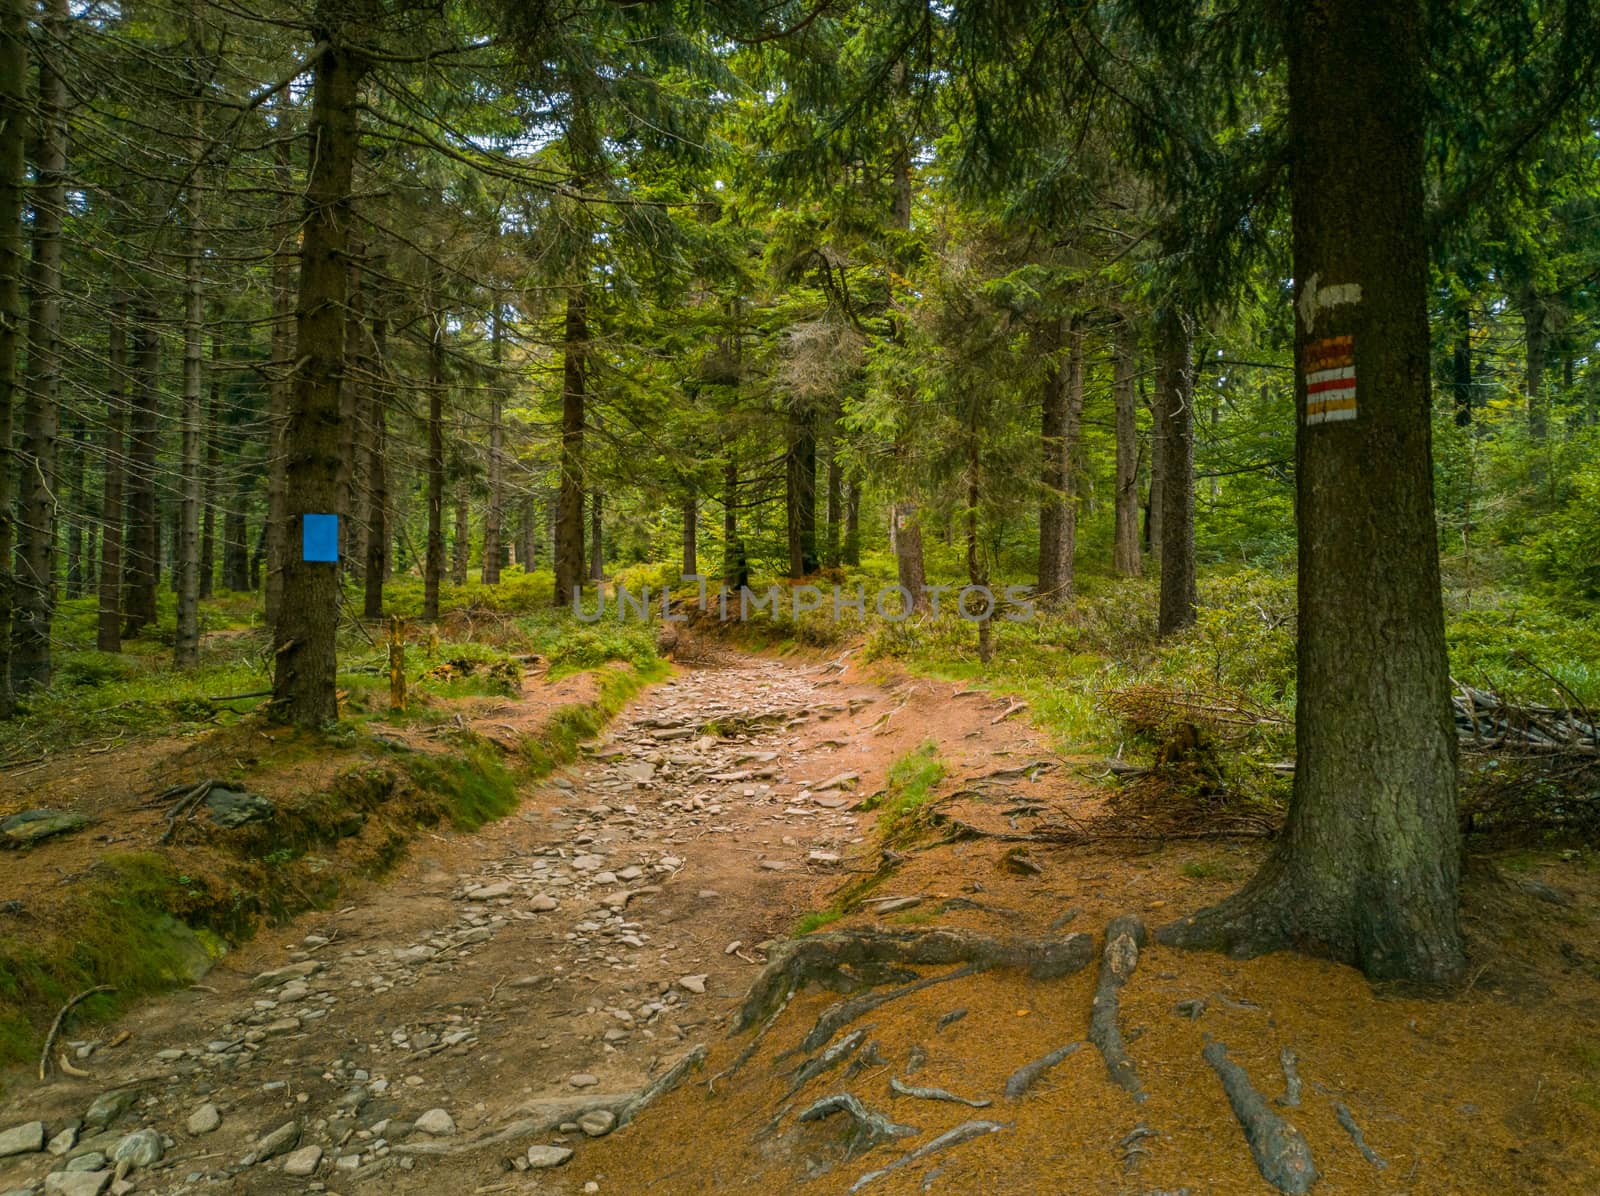 Long stony pathway in Owl Mountains between bushes and trees  with signs on trees by Wierzchu